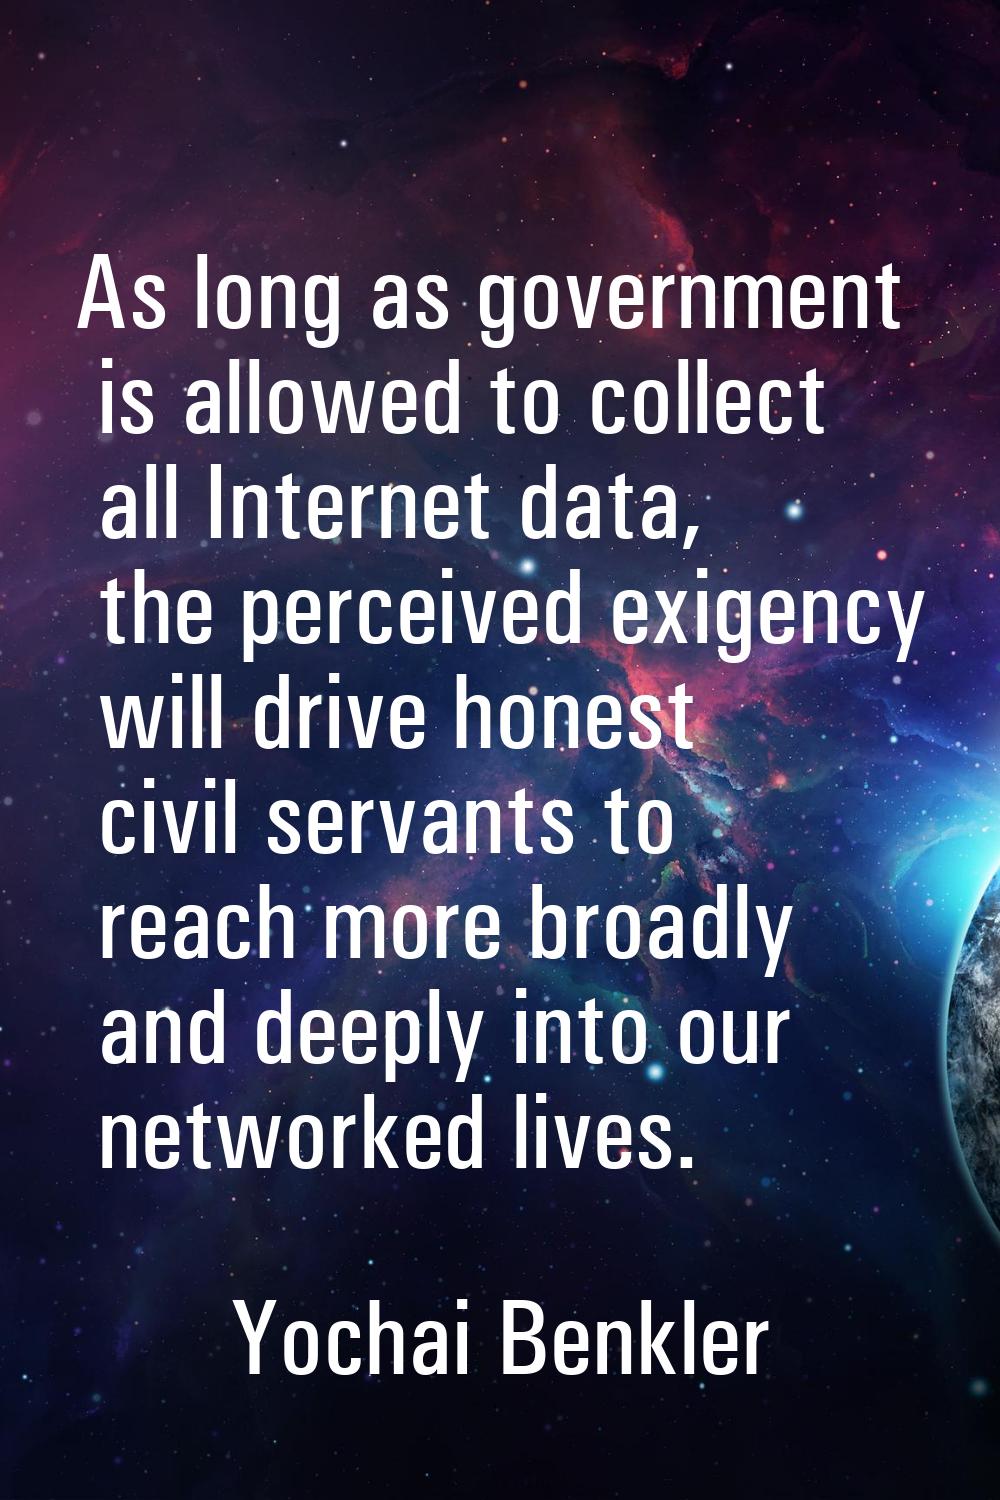 As long as government is allowed to collect all Internet data, the perceived exigency will drive ho